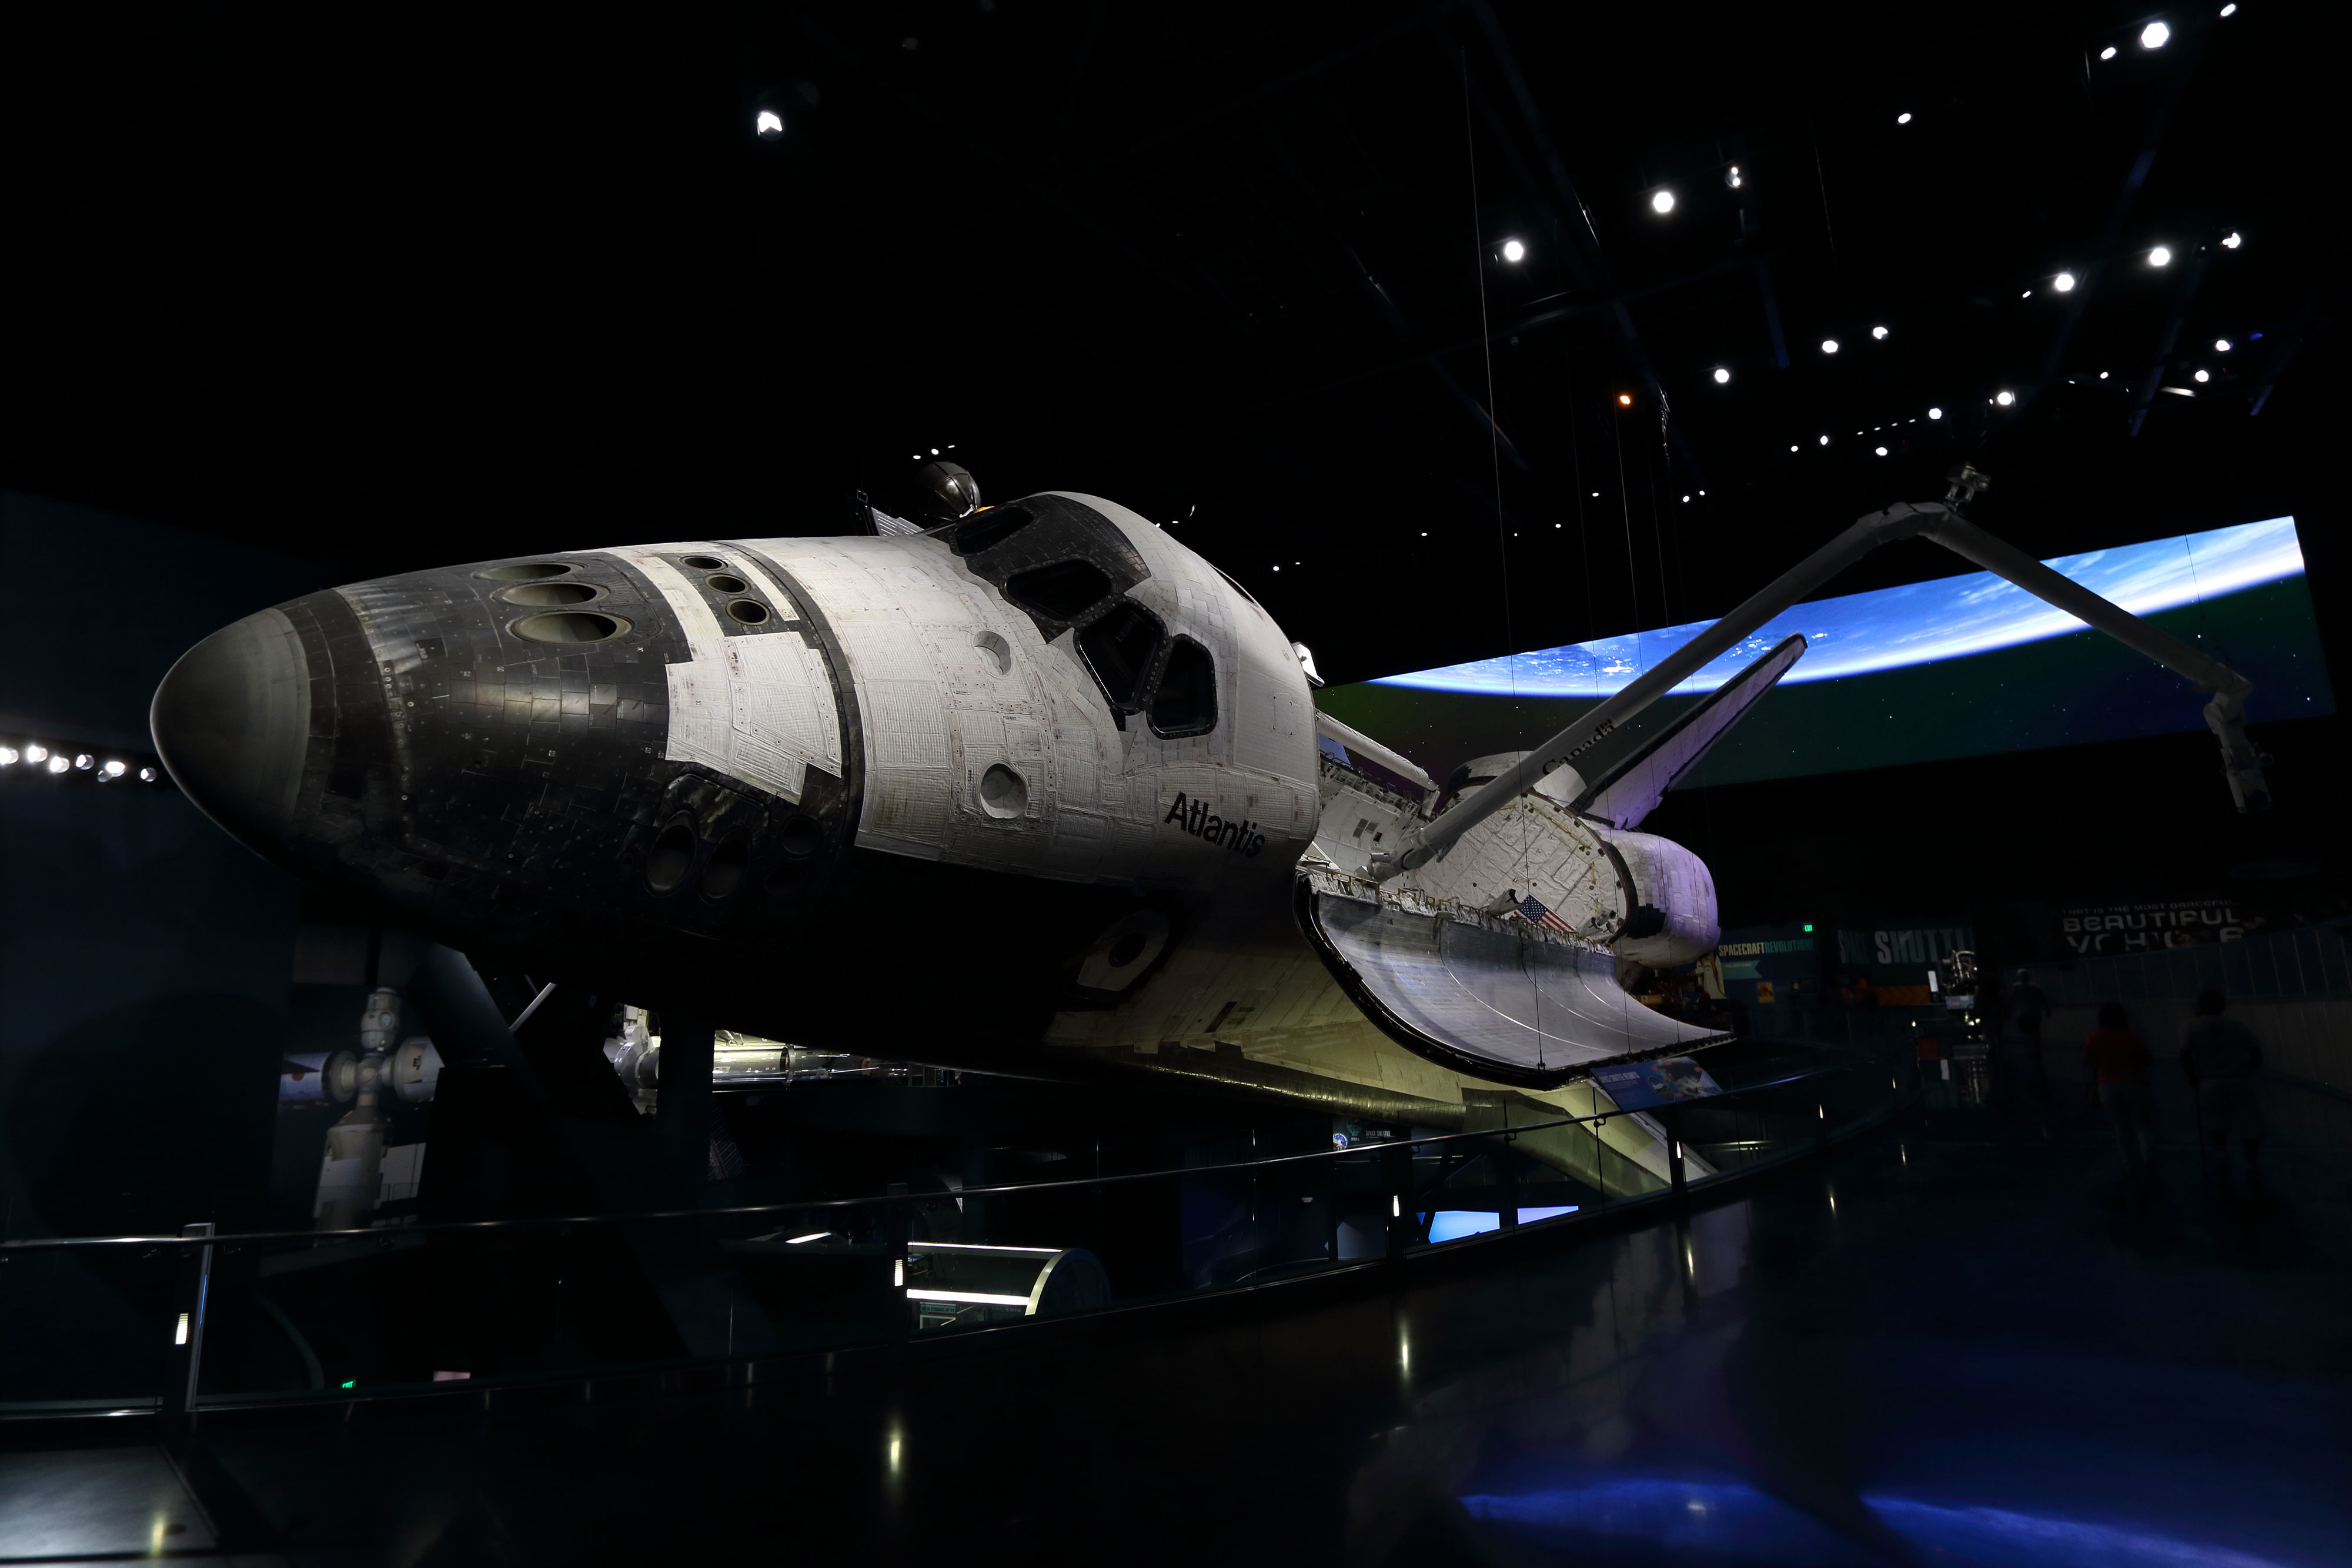 Space Shuttle Atlantis on display at the Kennedy Space Center Visitor Complex. Credit: Lloyd Campbell